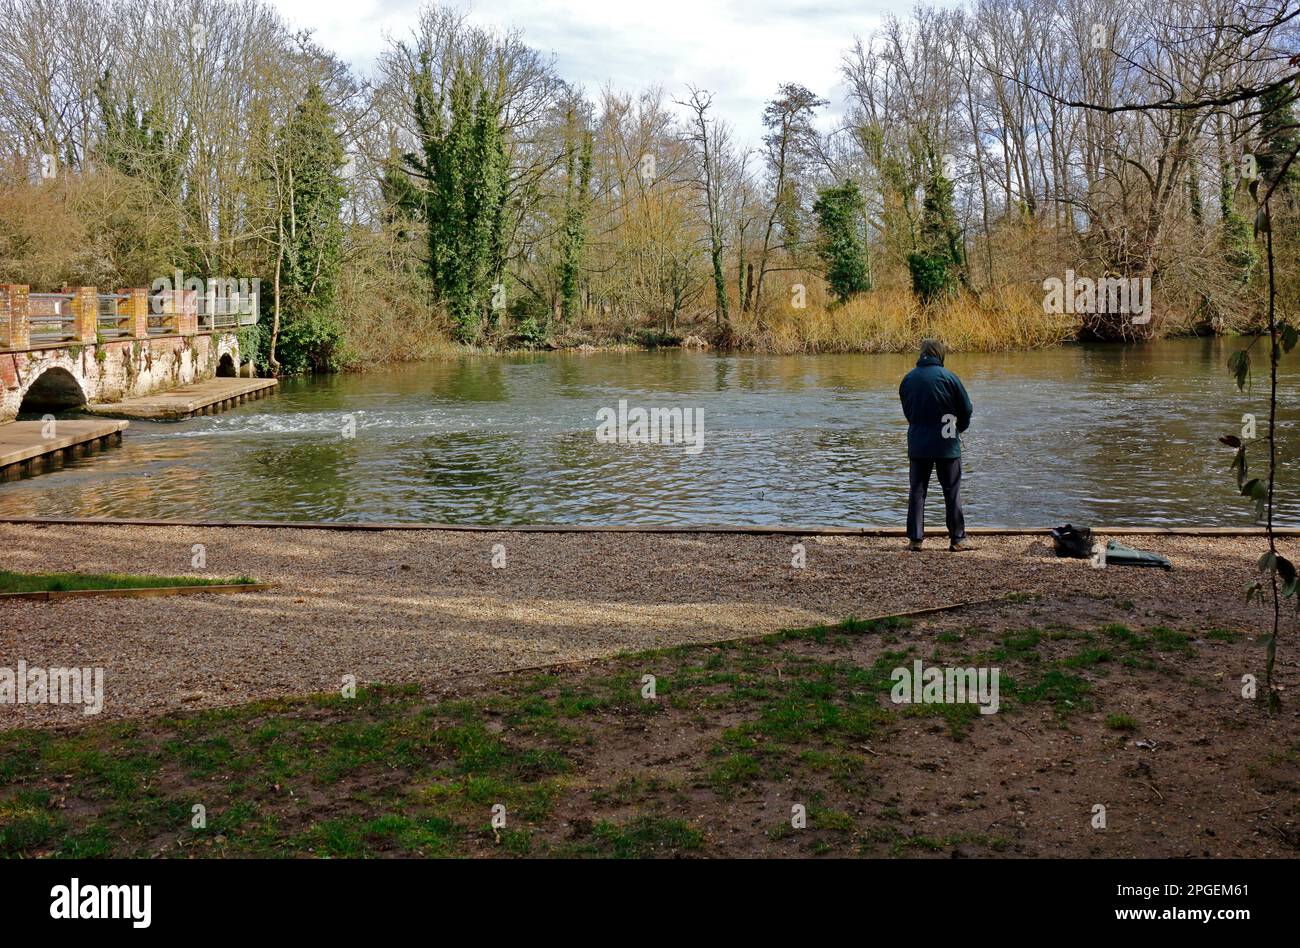 An angler fishing the mill pool by the remains of the old mill on the River Bure at Horstead, Norfolk, England, United Kingdom. Stock Photo